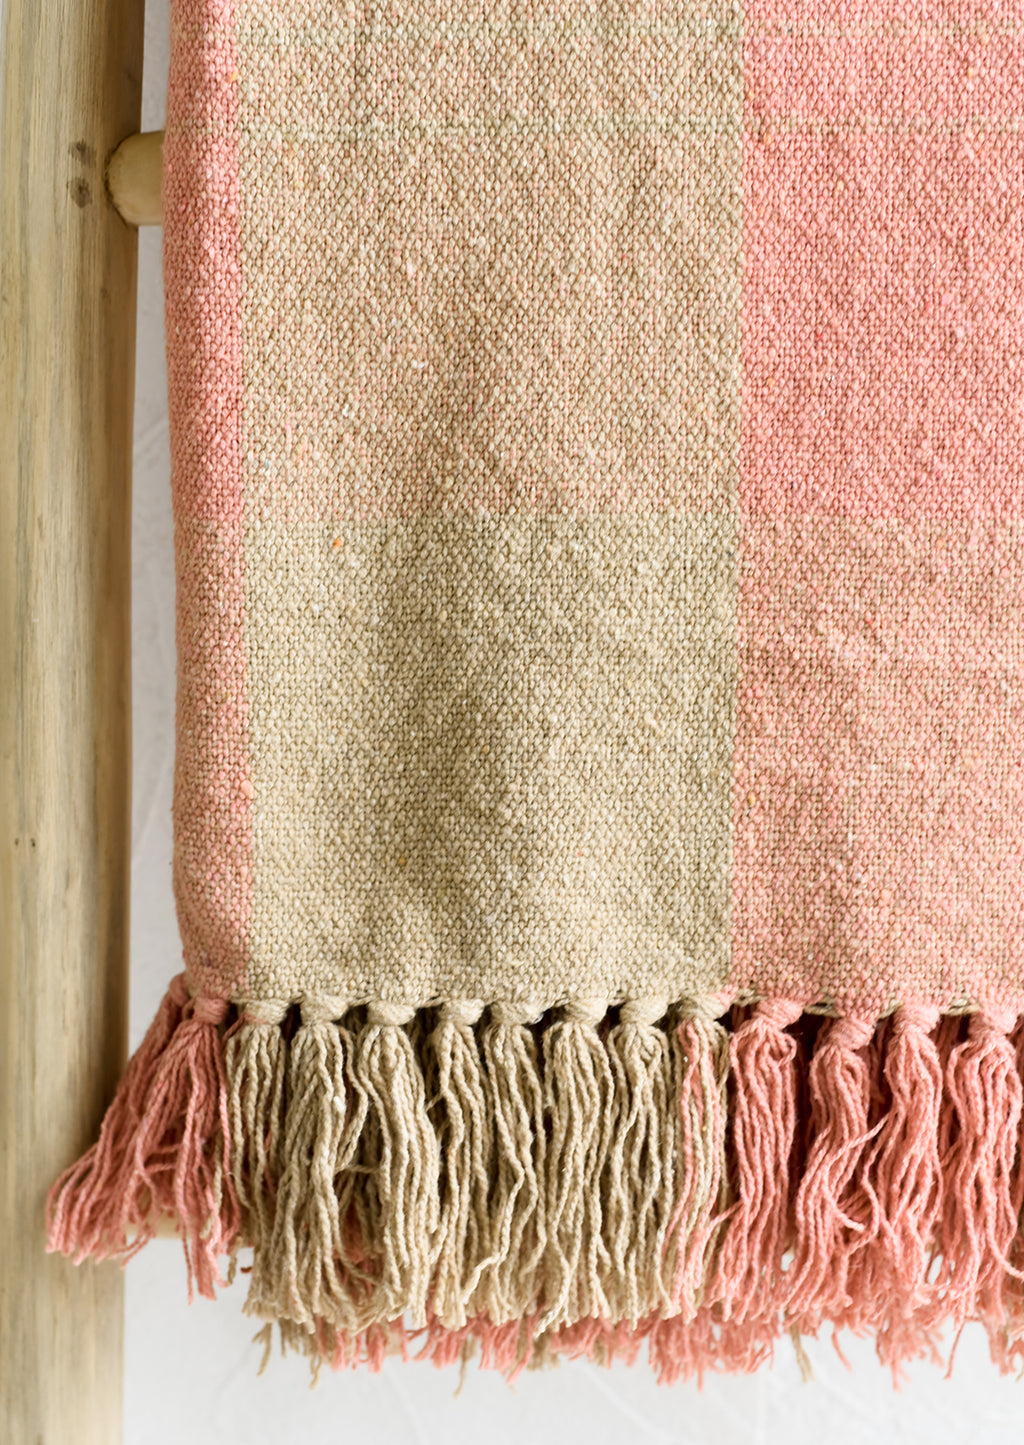 2: A cotton blank in peach and tan check pattern with fringe trim.